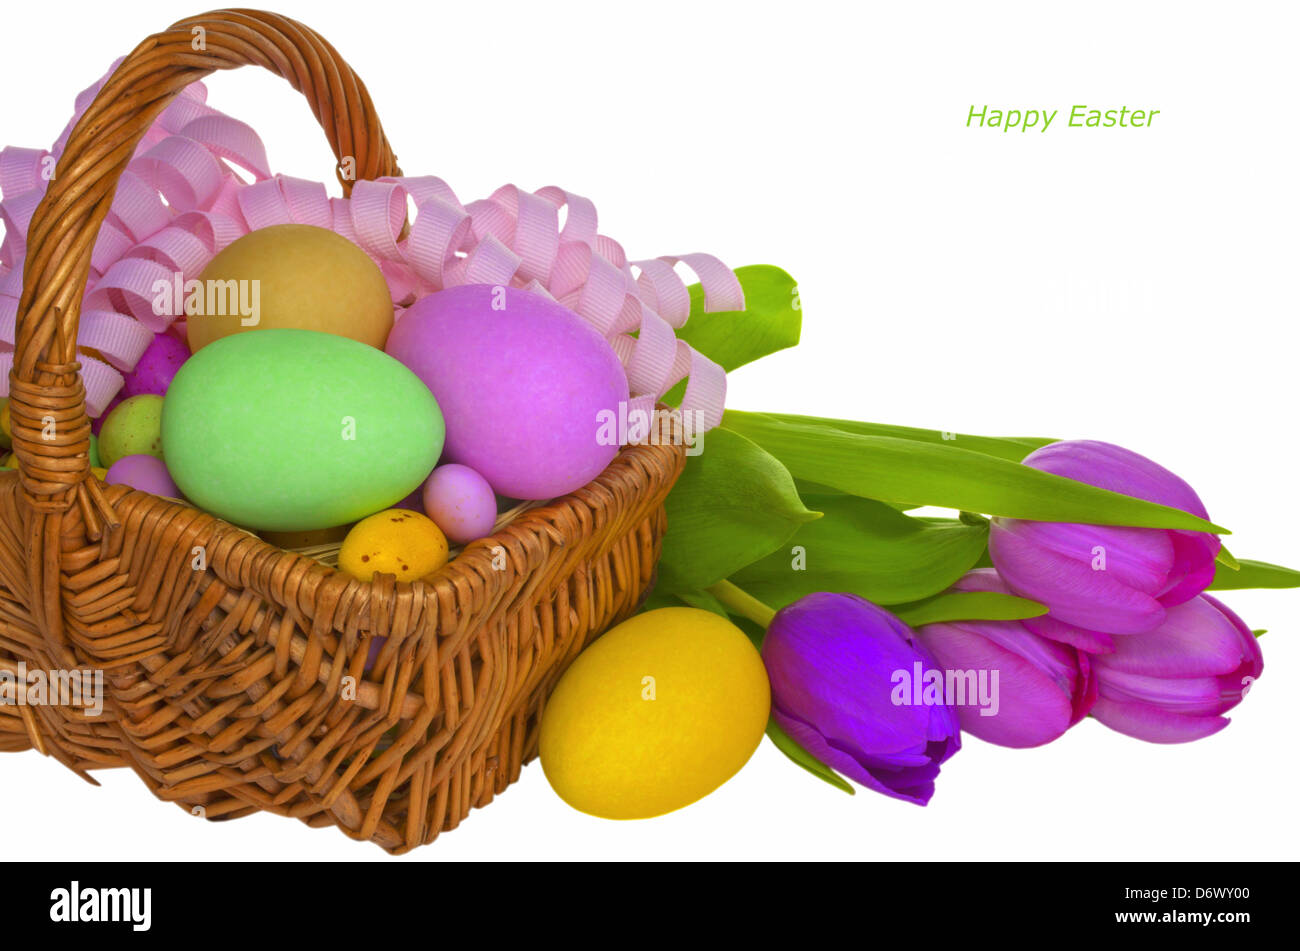 Wicker basket with colored eggs and flowers. Stock Photo